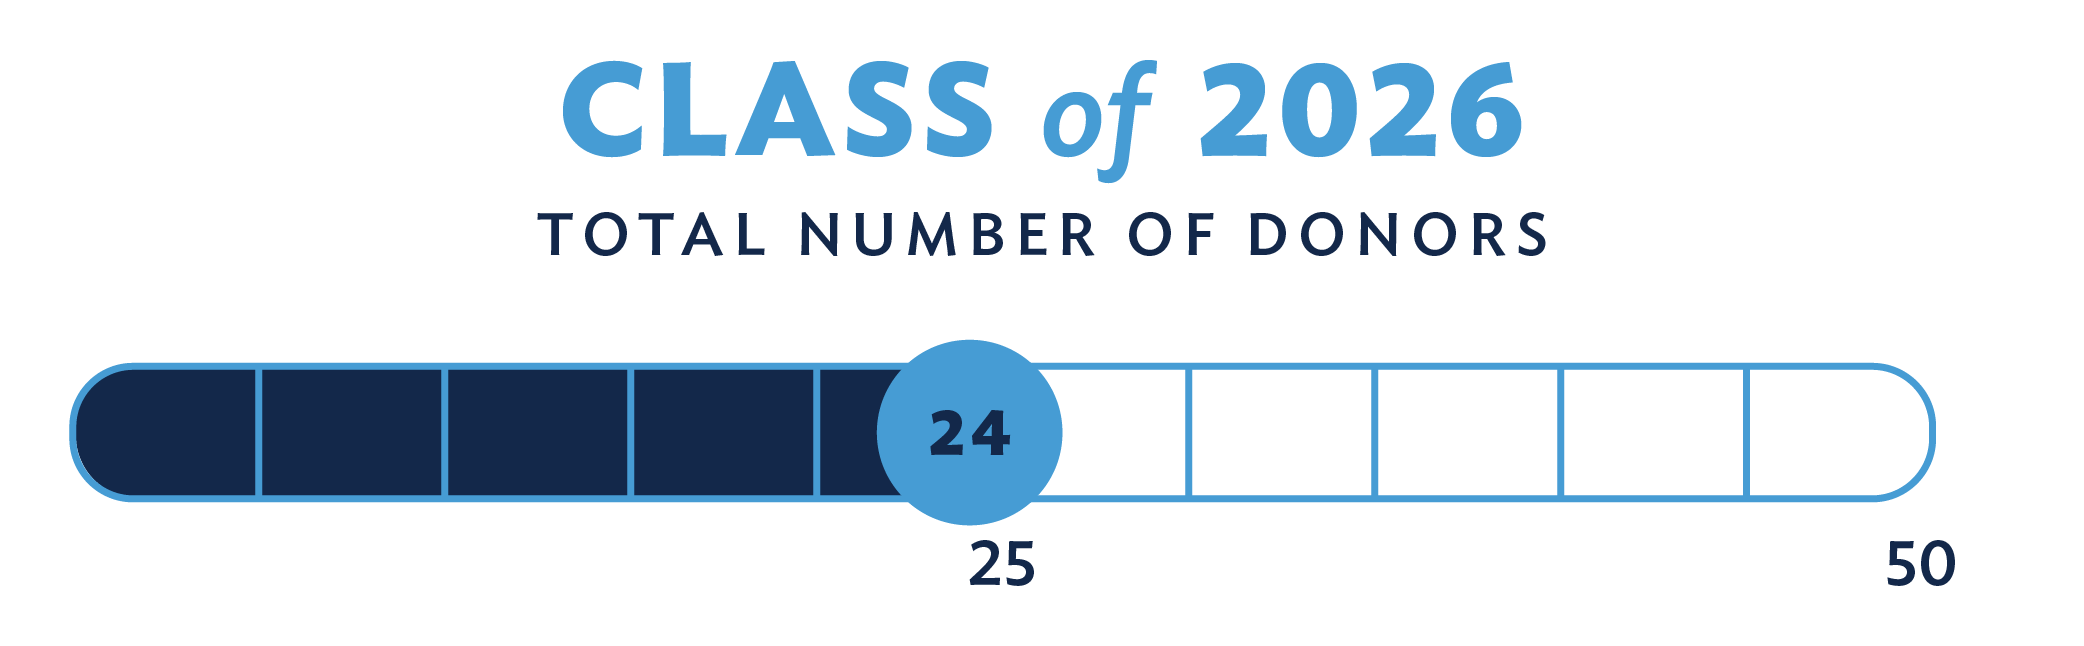 Class of 2026 Total number of donors: 24 out of a goal of 50